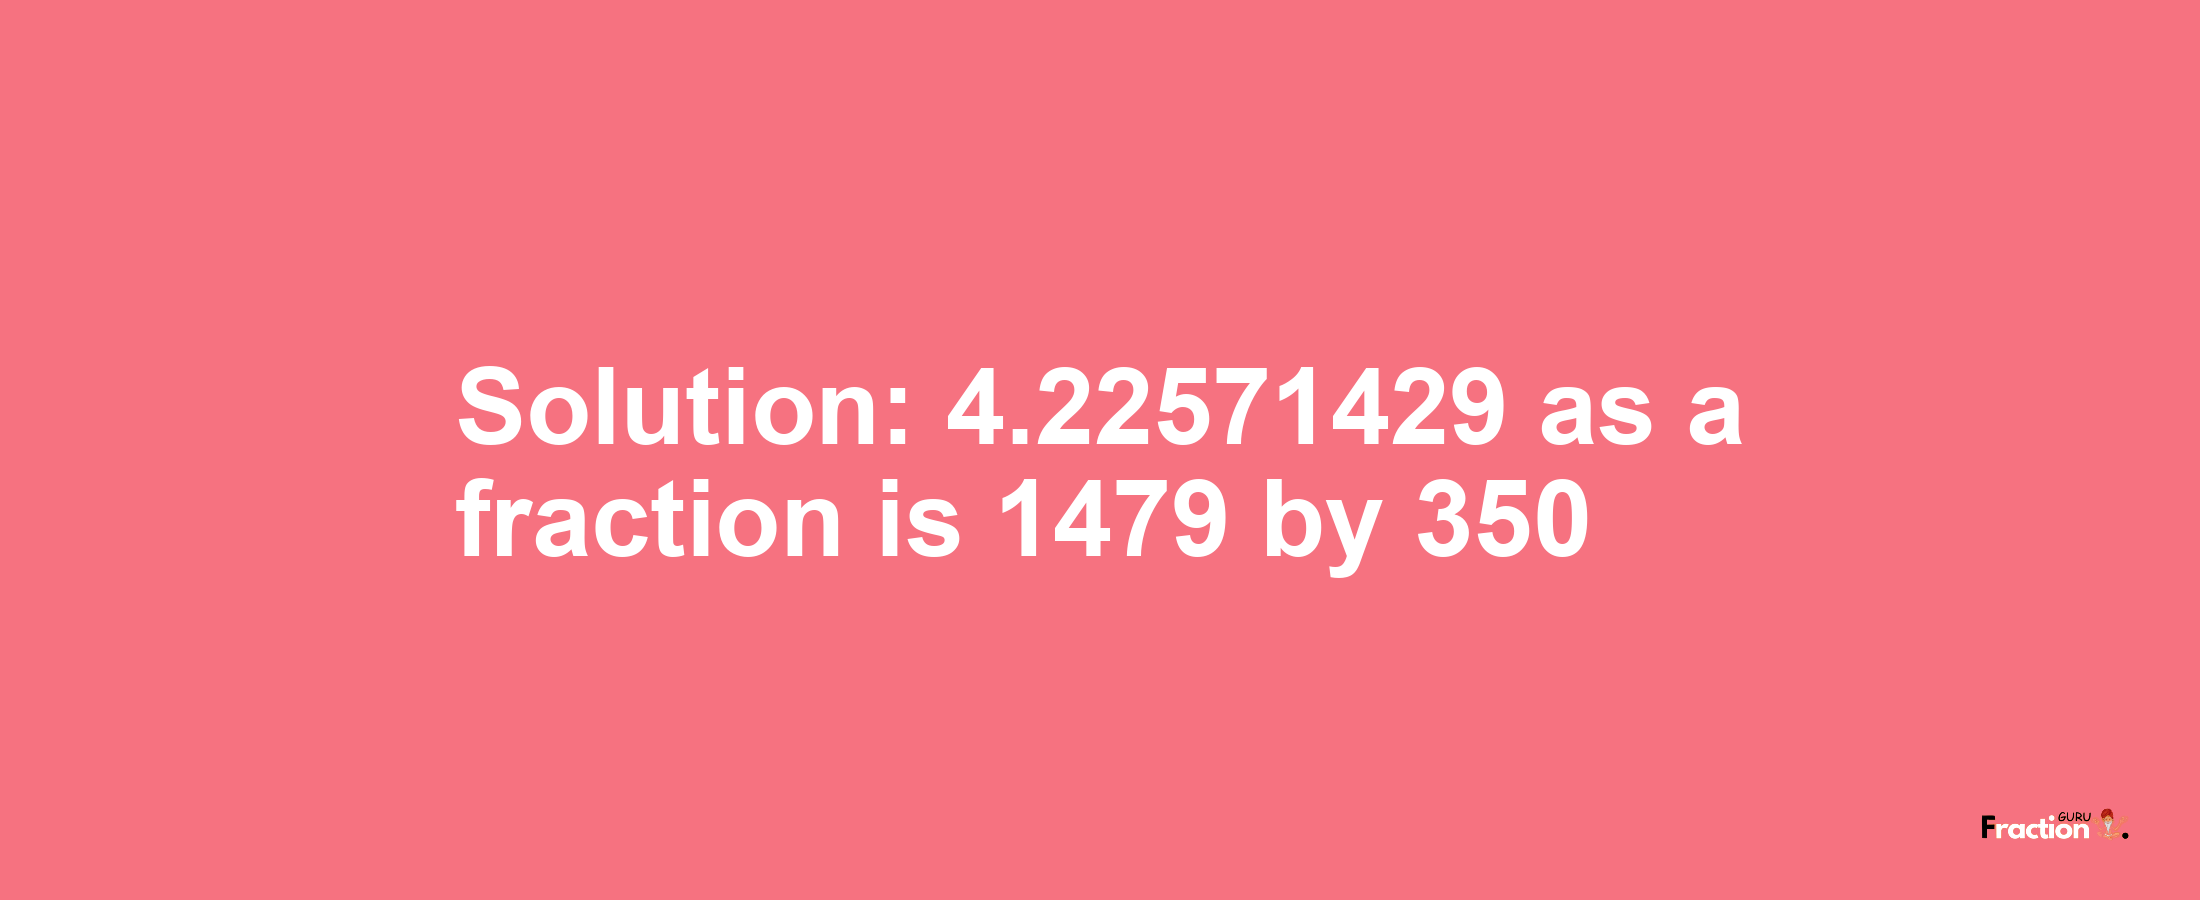 Solution:4.22571429 as a fraction is 1479/350